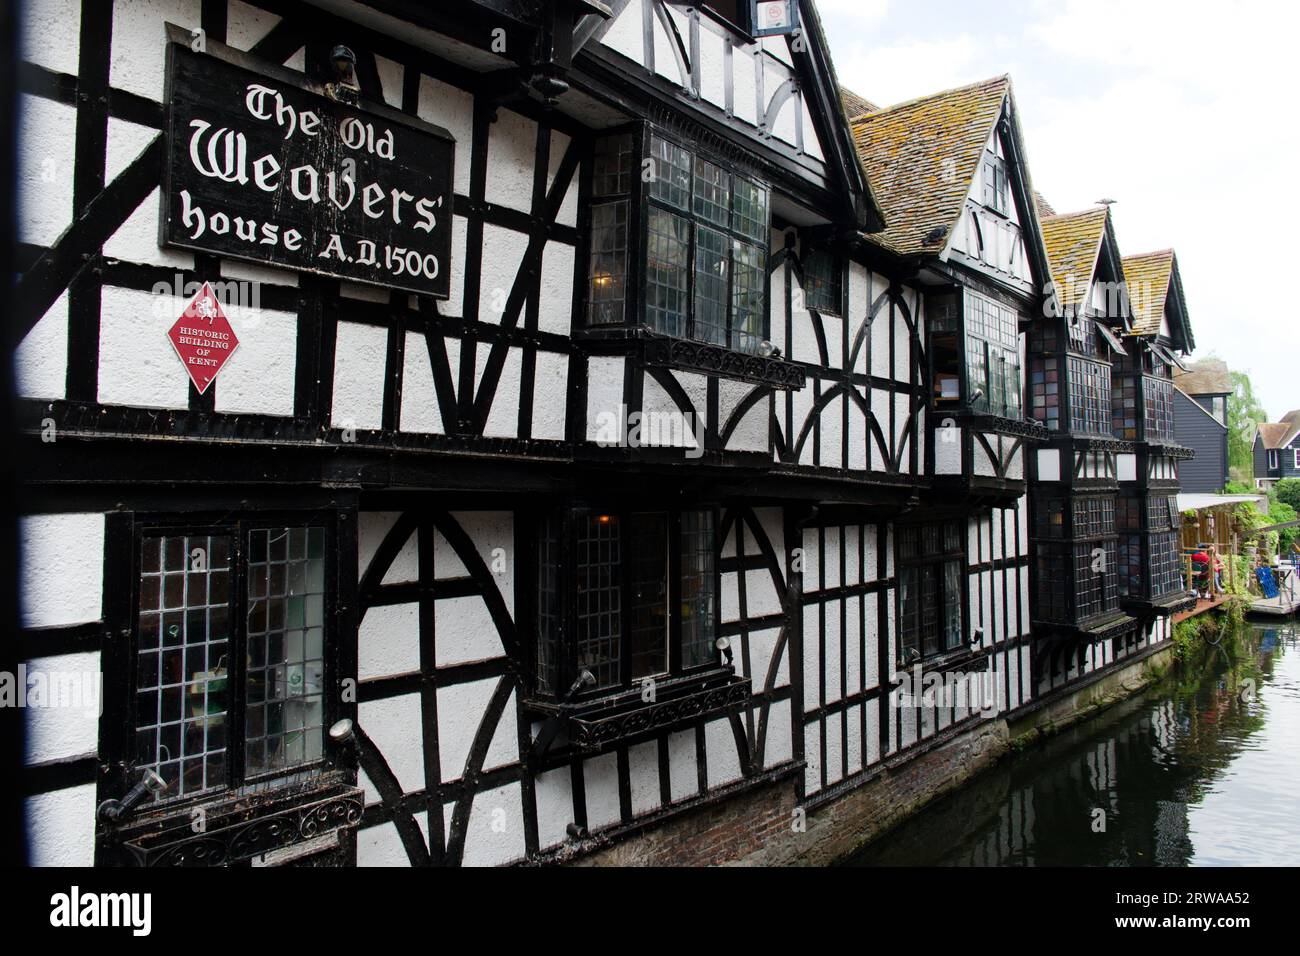 The Old Weavers House on the left bank dates from 1500 and is built on the River Stour, Canterbury,England. Stock Photo